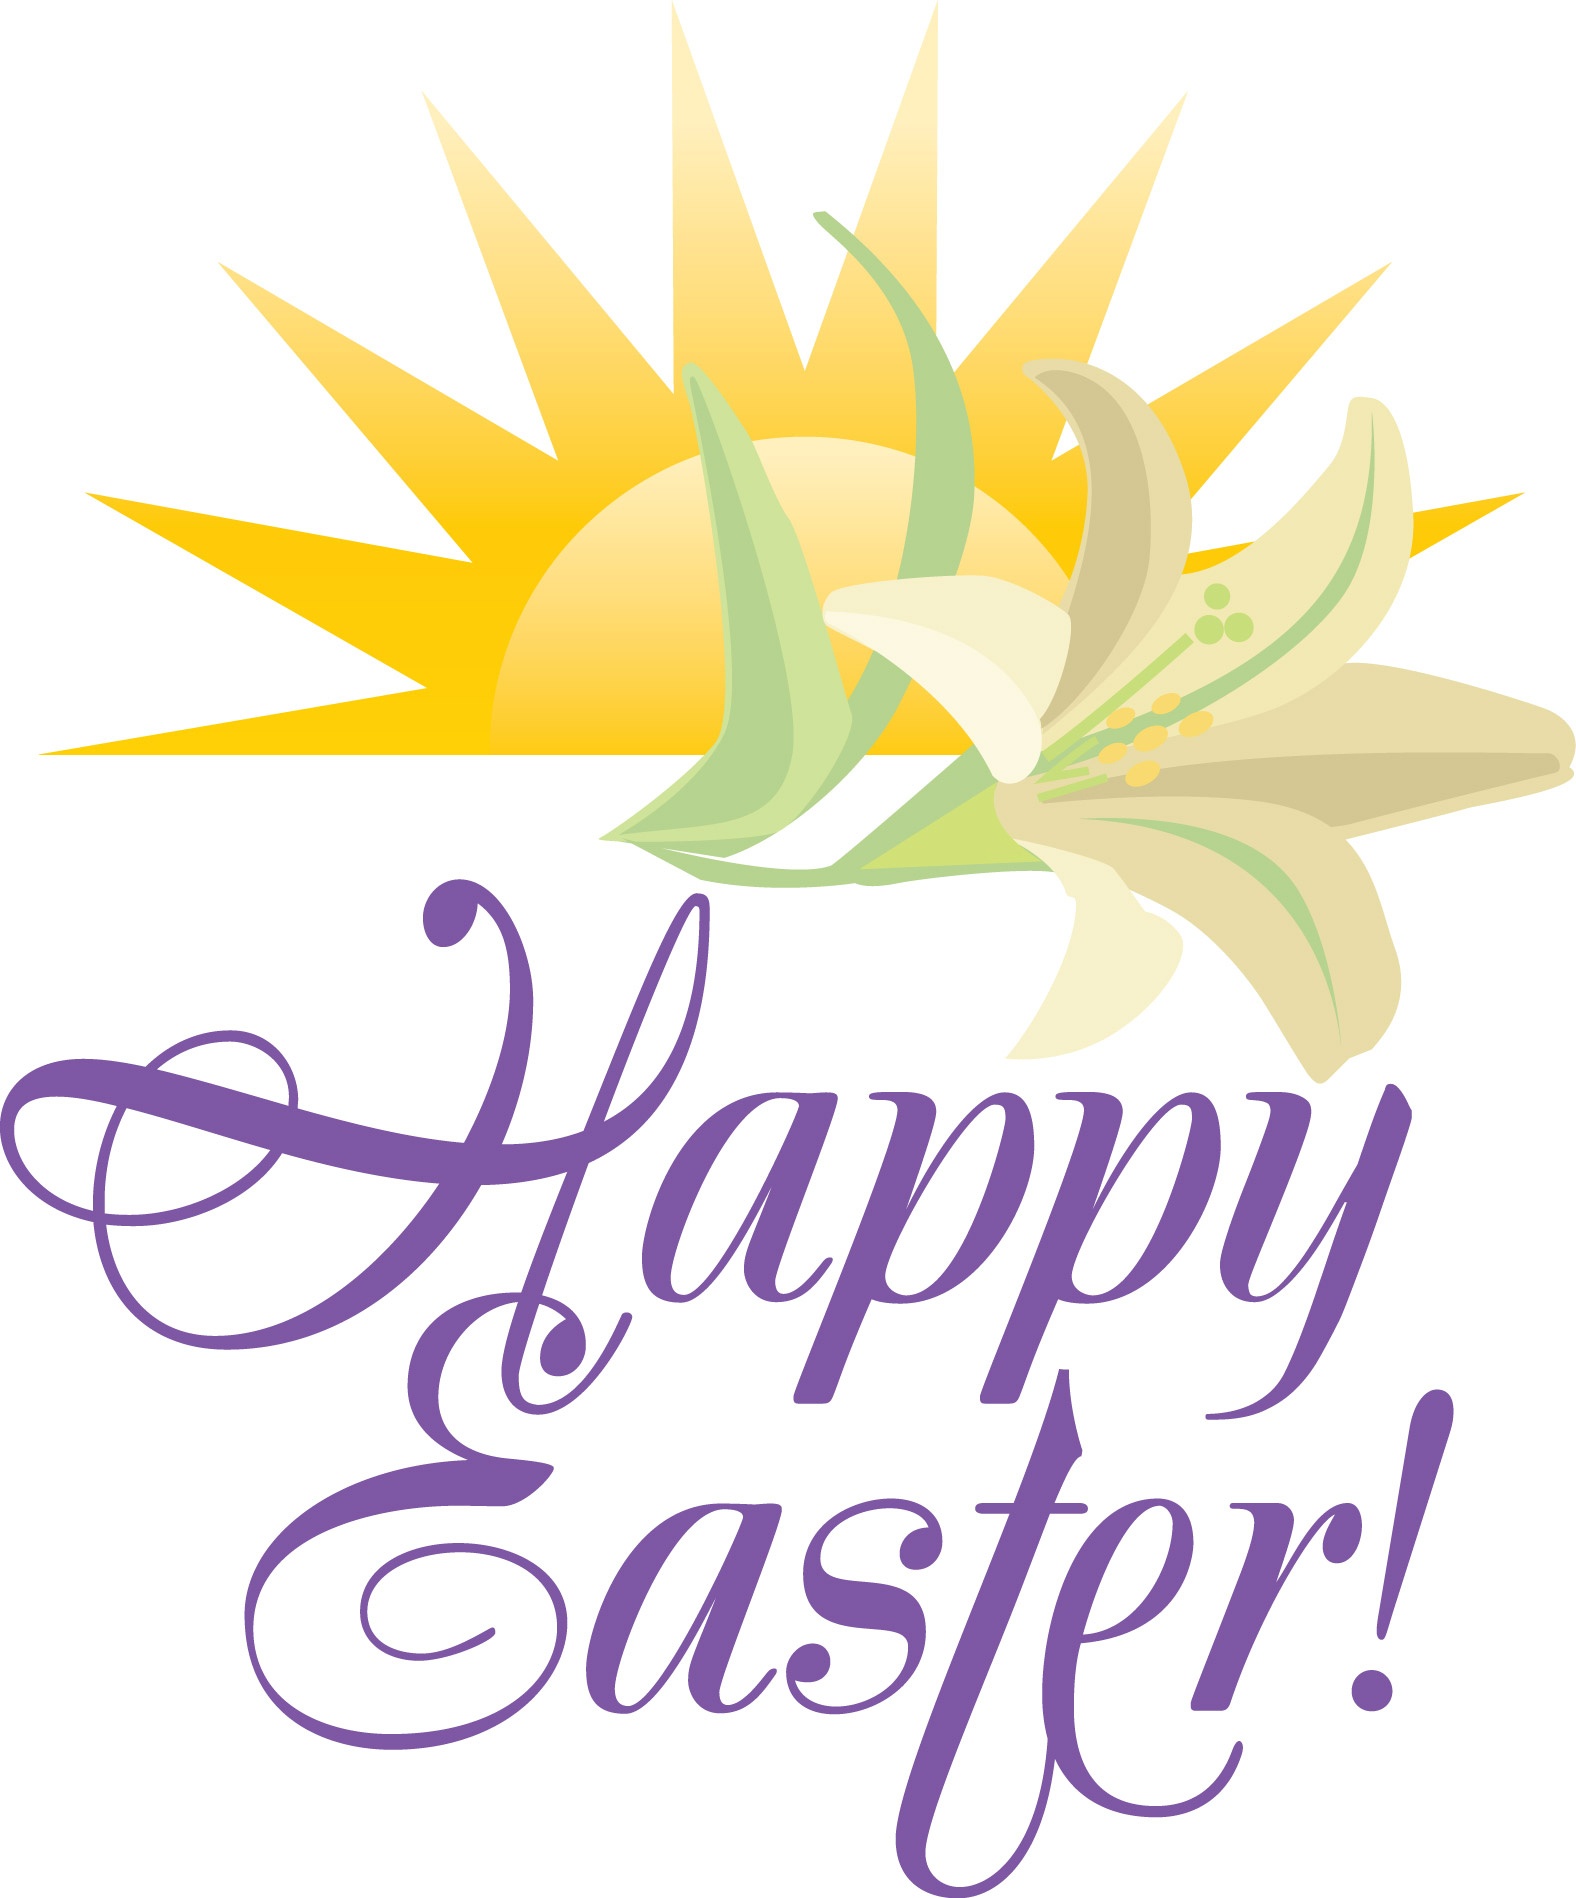 Free Easter Sunday Images, Download Free Clip Art, Free Clip Art On - Free Printable Easter Sermons